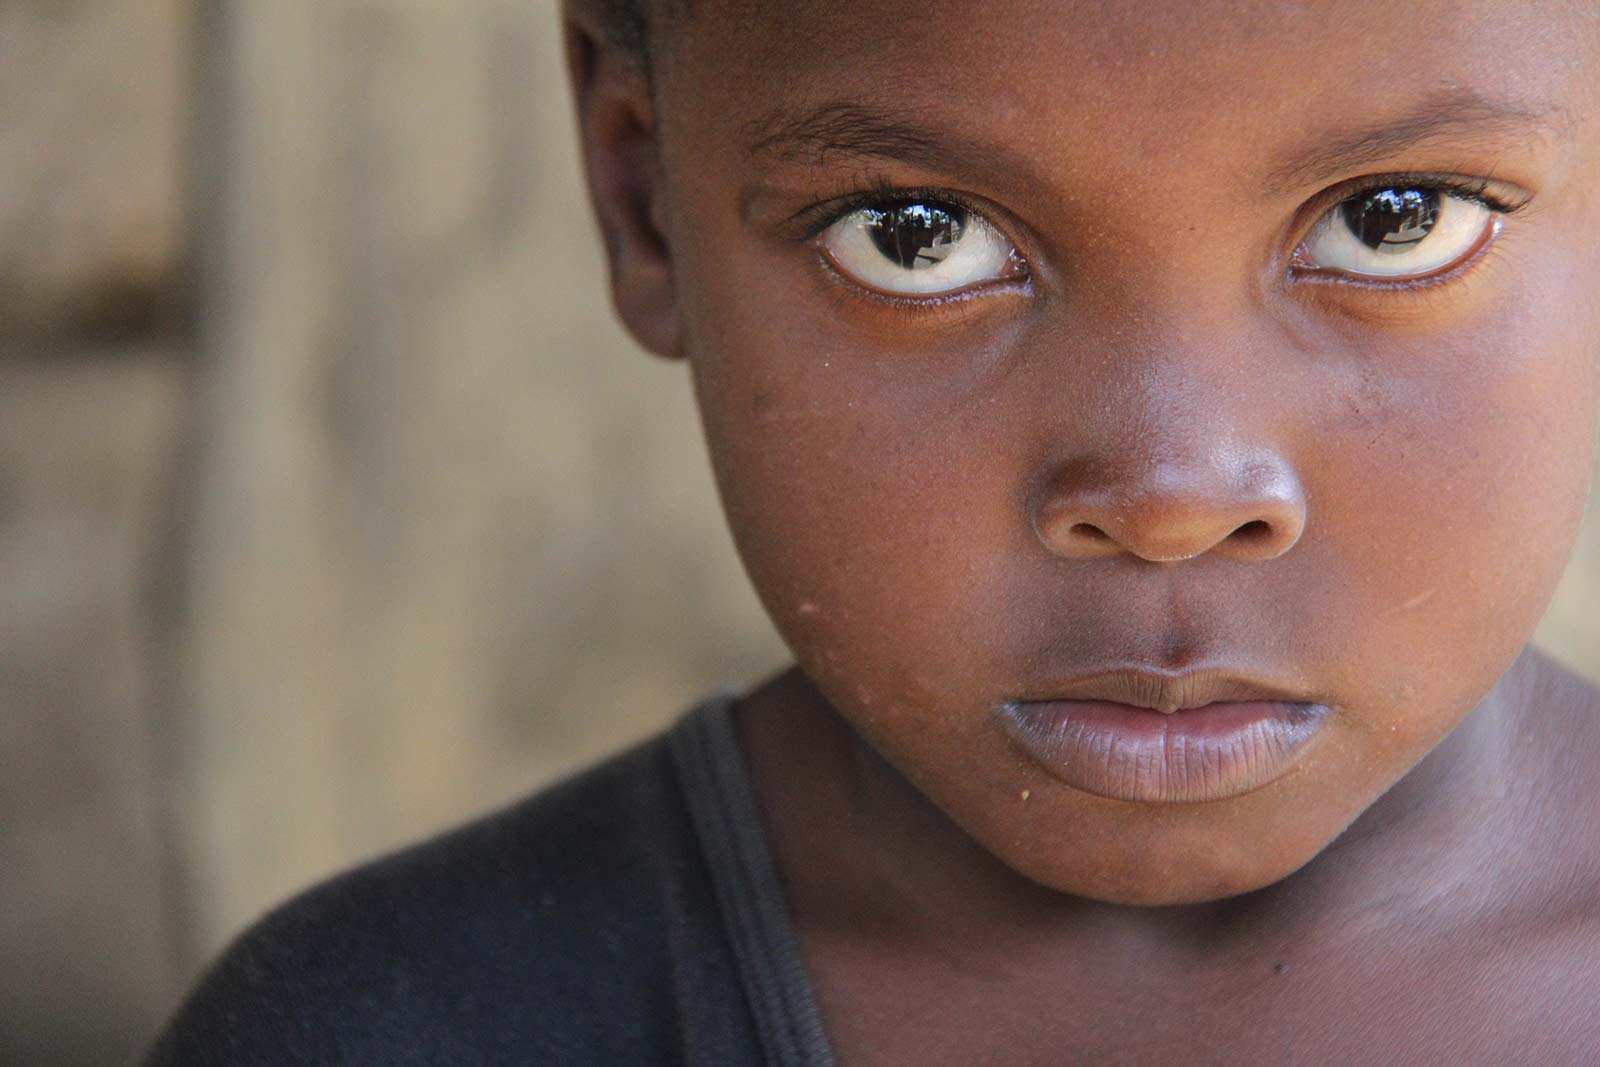 Haiti Health Initiative Photography (Pictures of Locals #10) - April Stout